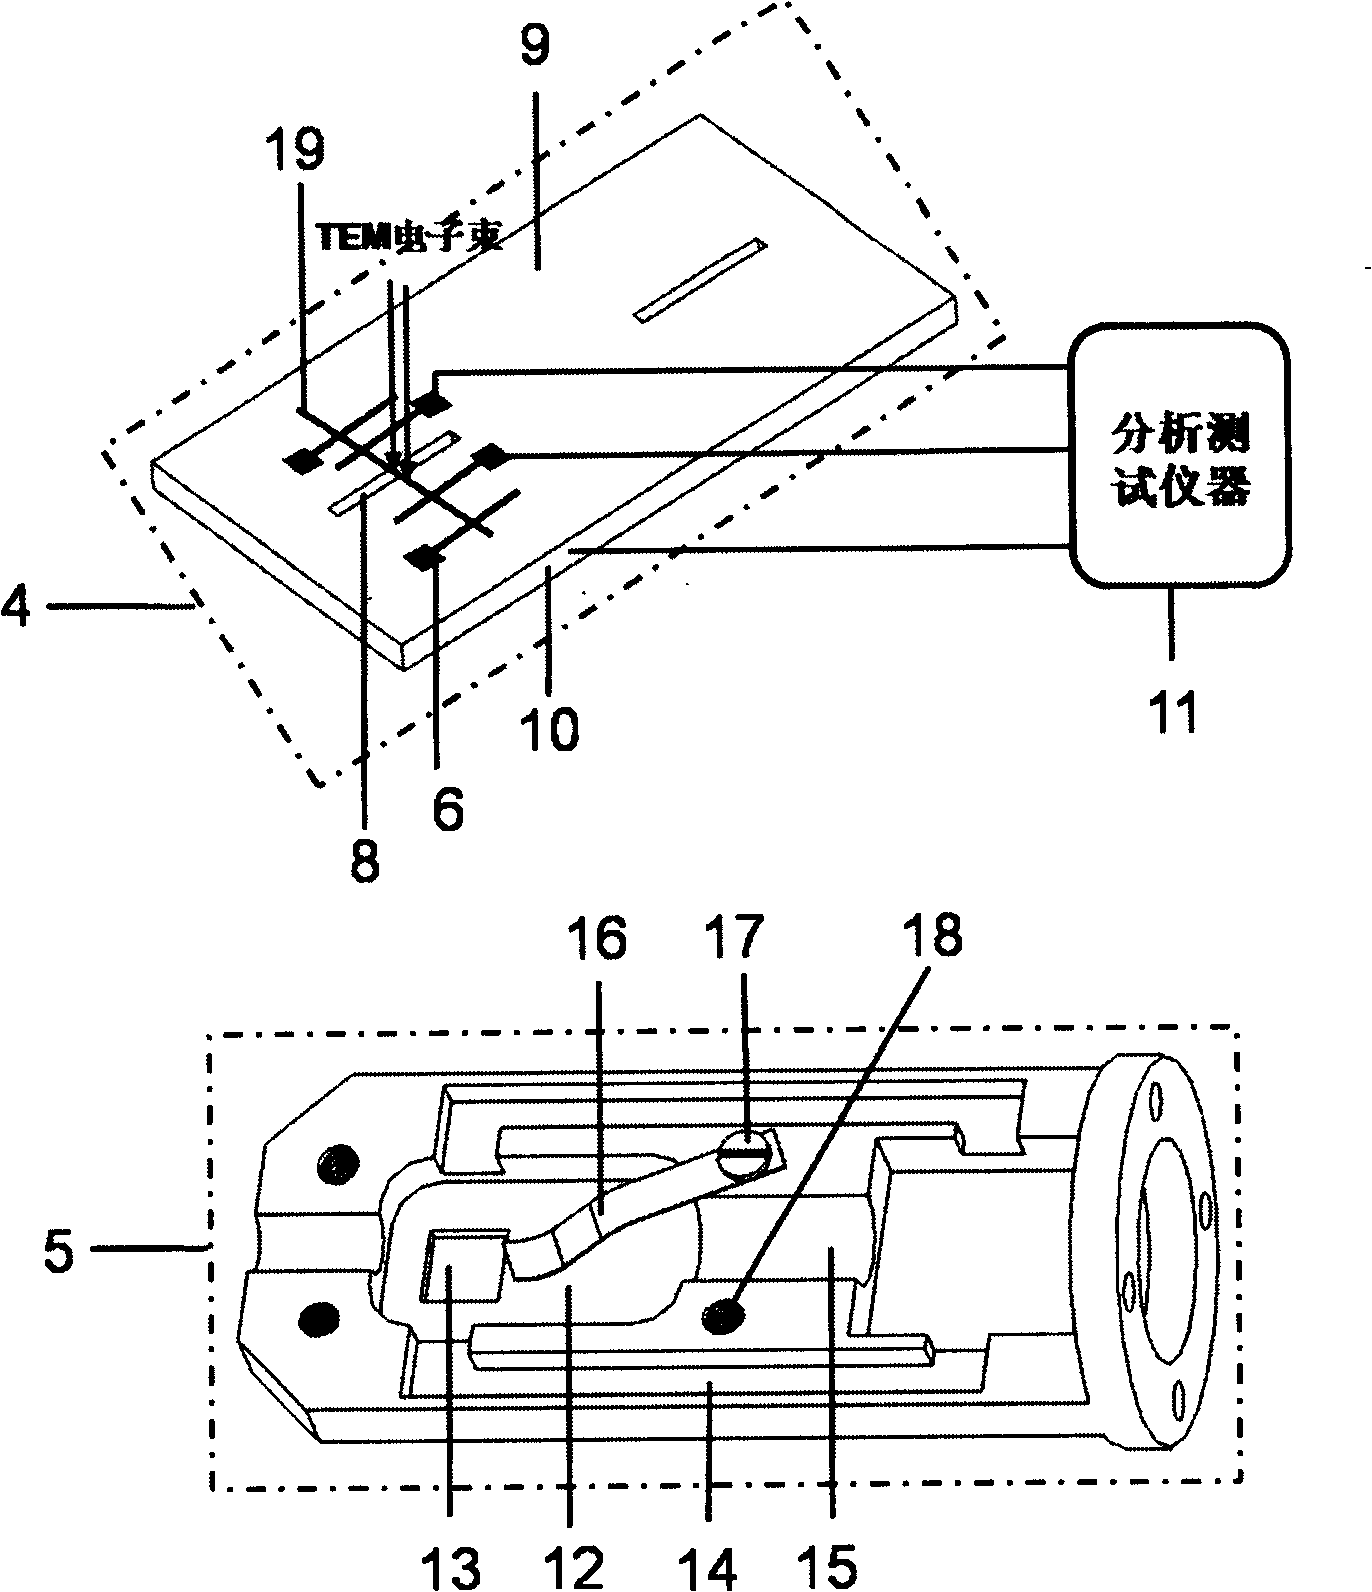 Sample platform system for in-situ measuring Na electronic device property in transmission electron microscope